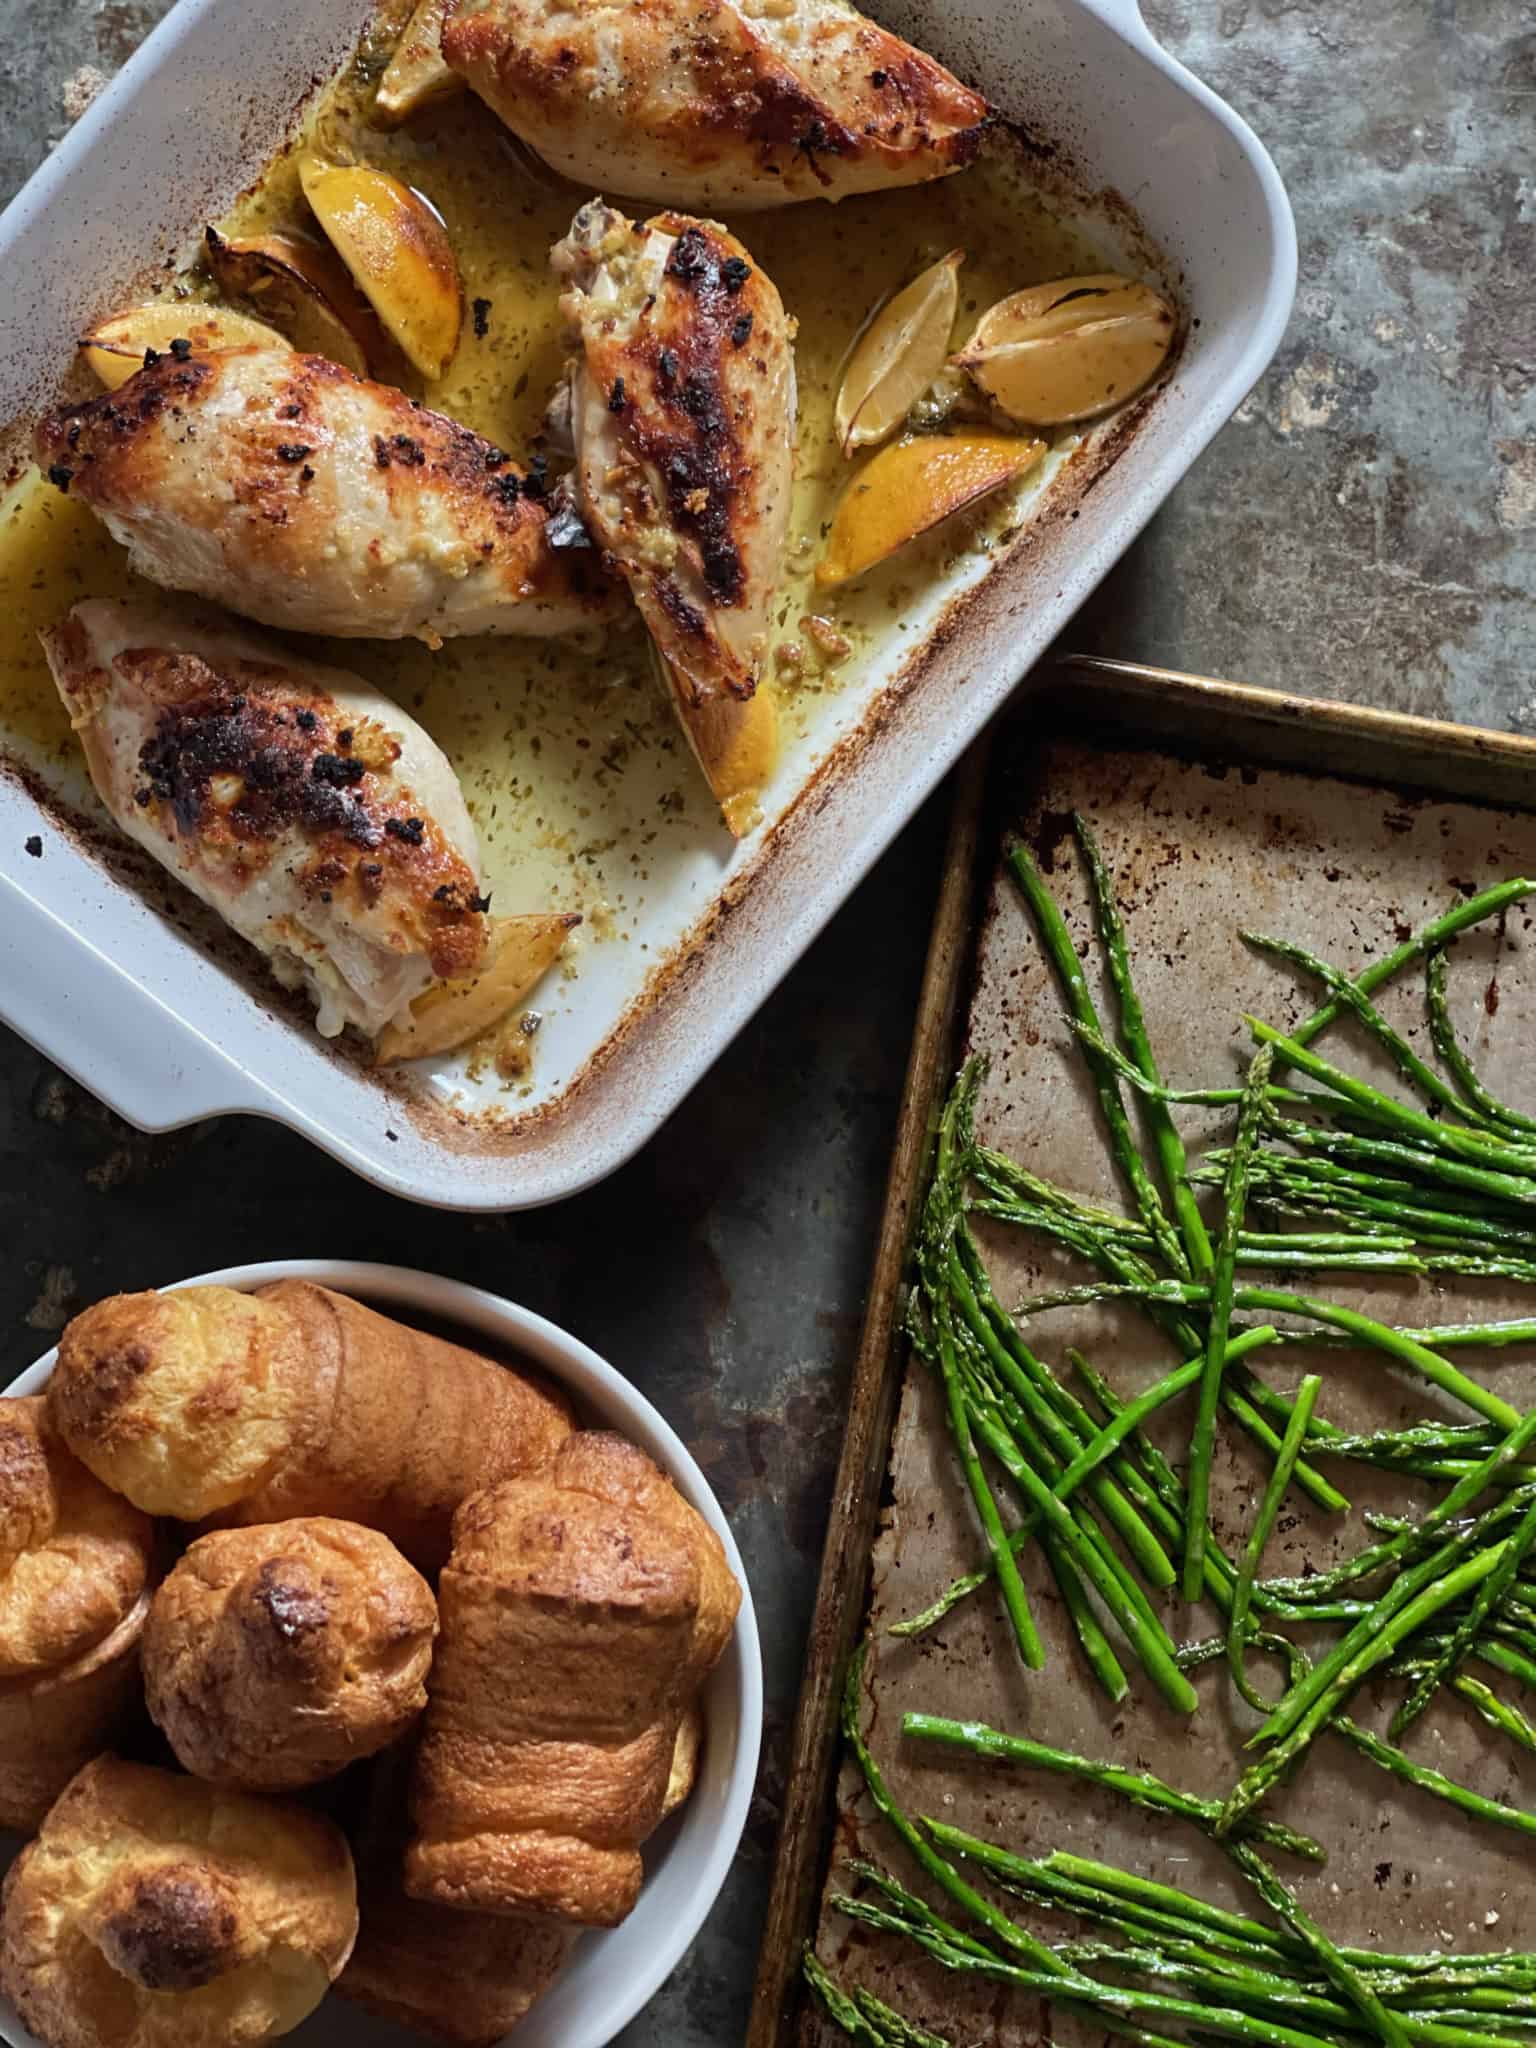 Chicken, Asparagus and rolls on table